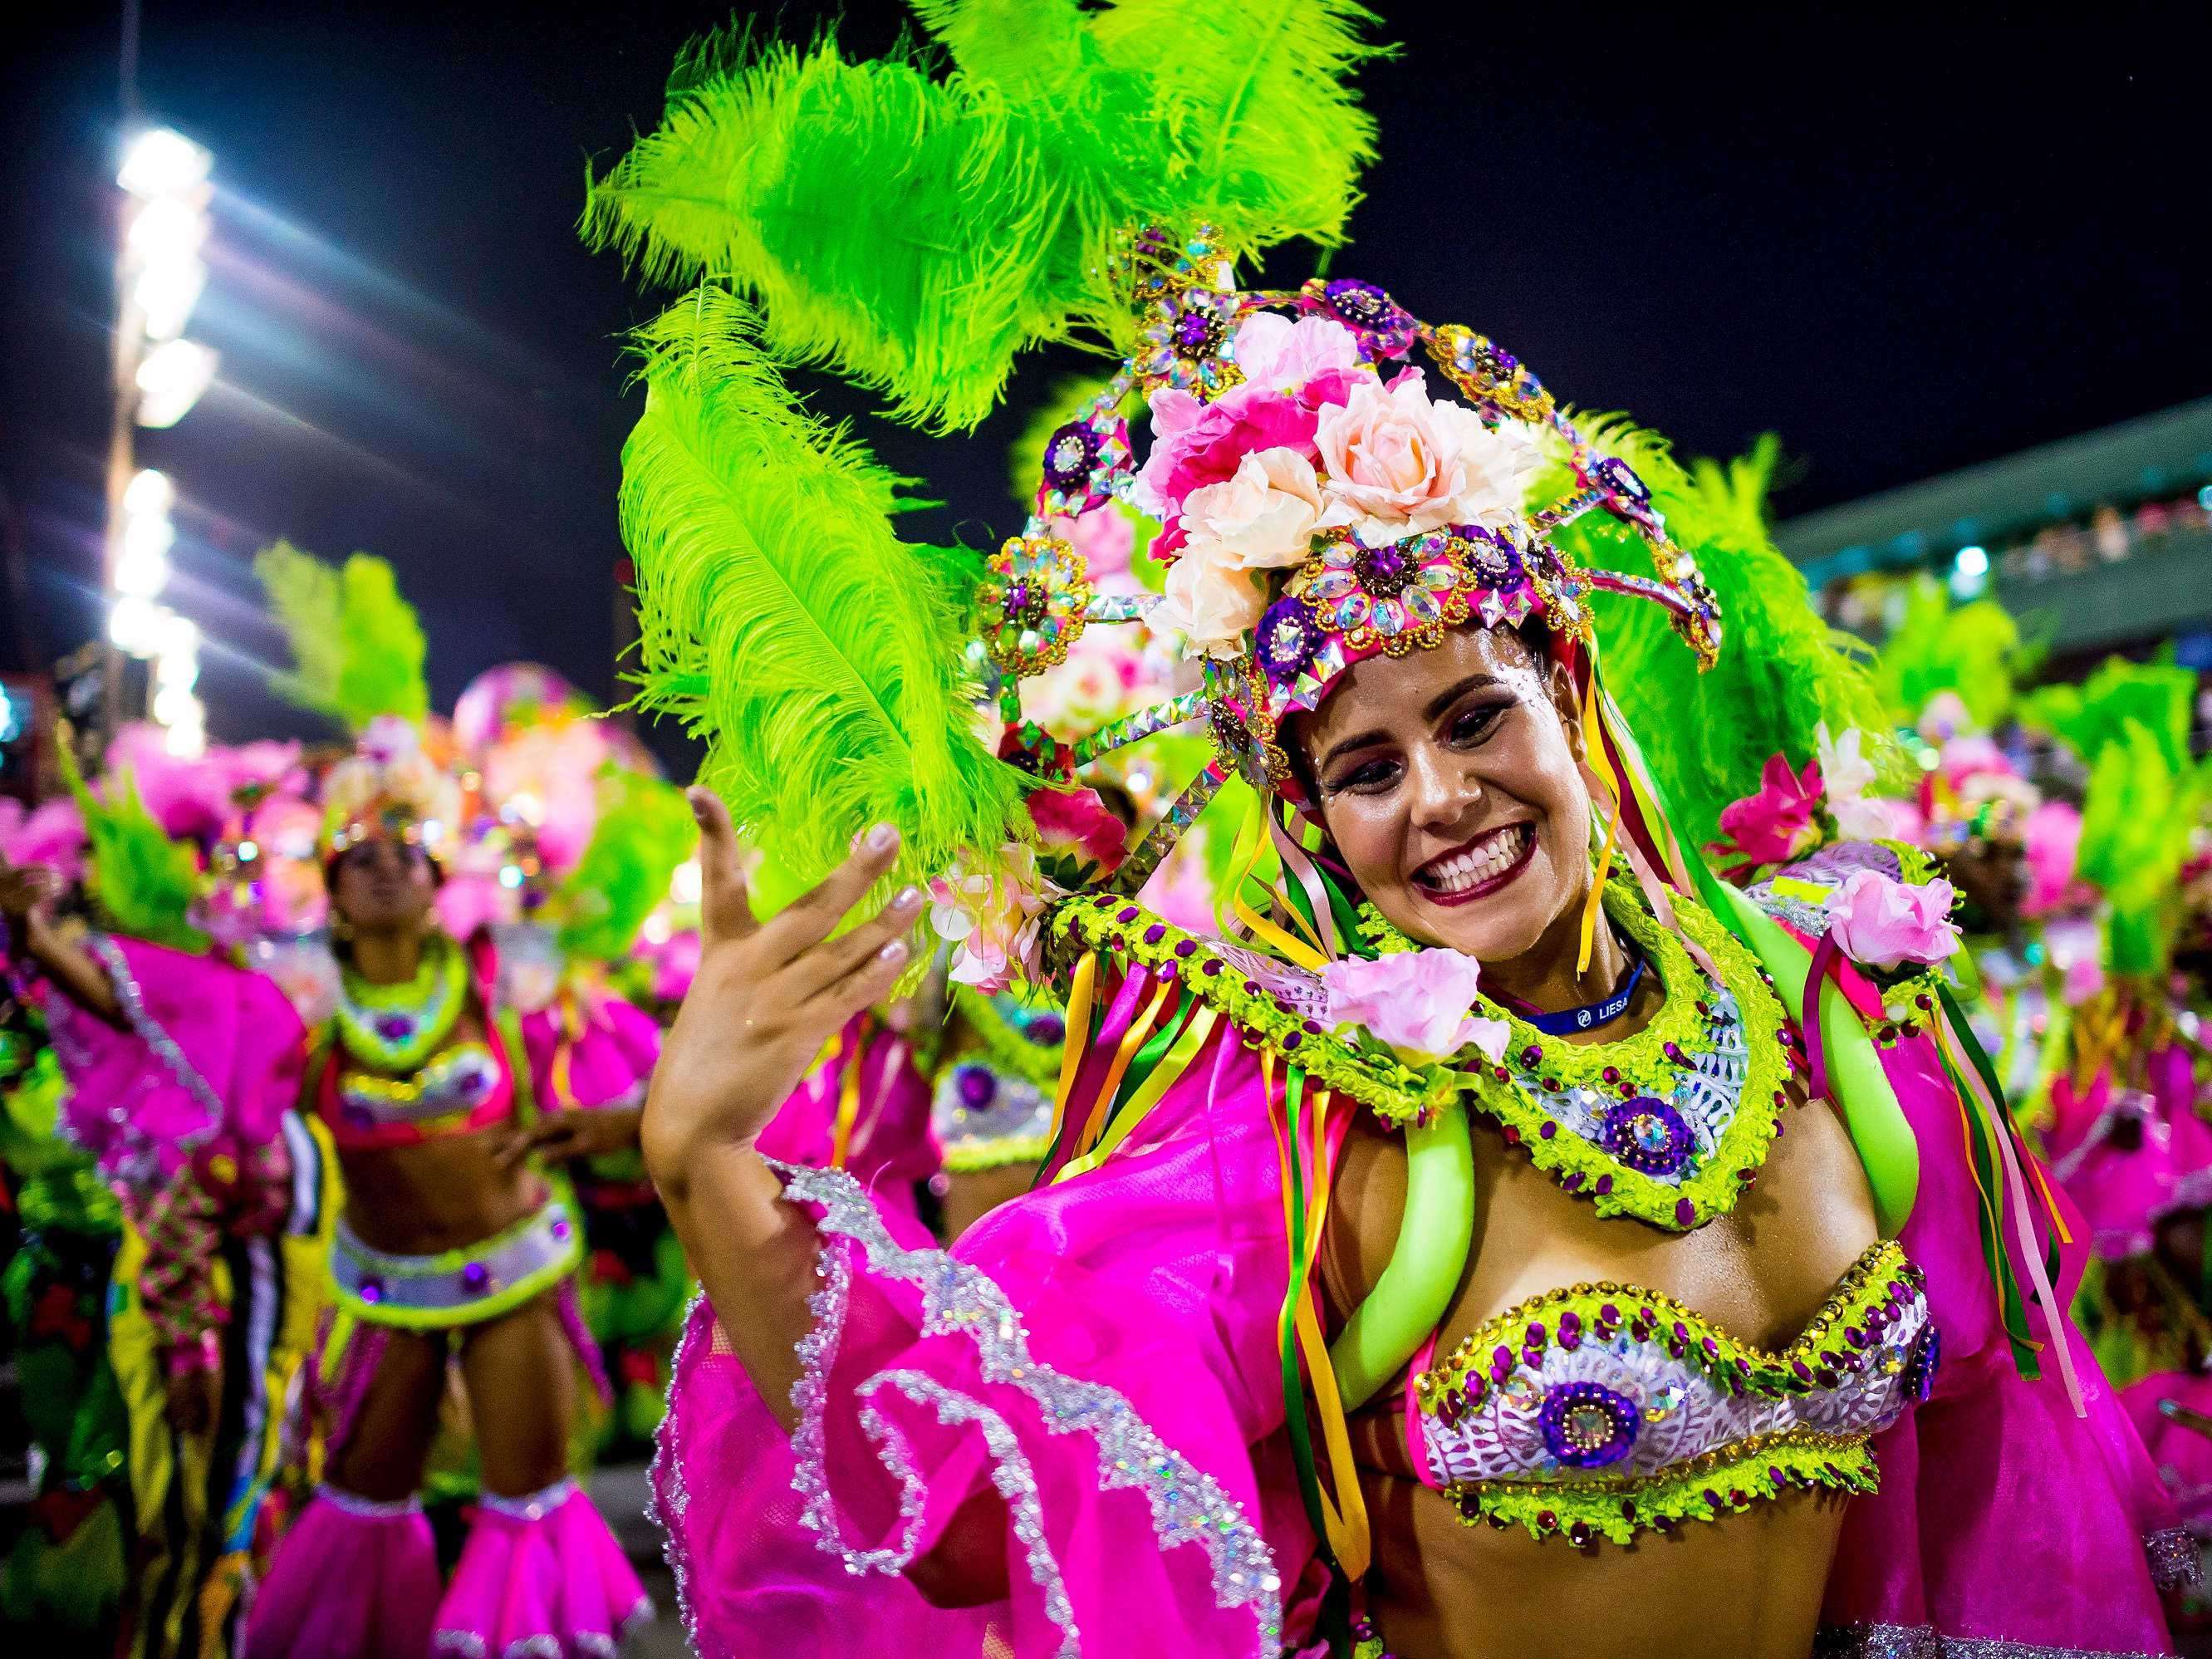 Rio De Janeiro Brazil Hosts The Biggest Carnival In The World With Stunning Costumes And